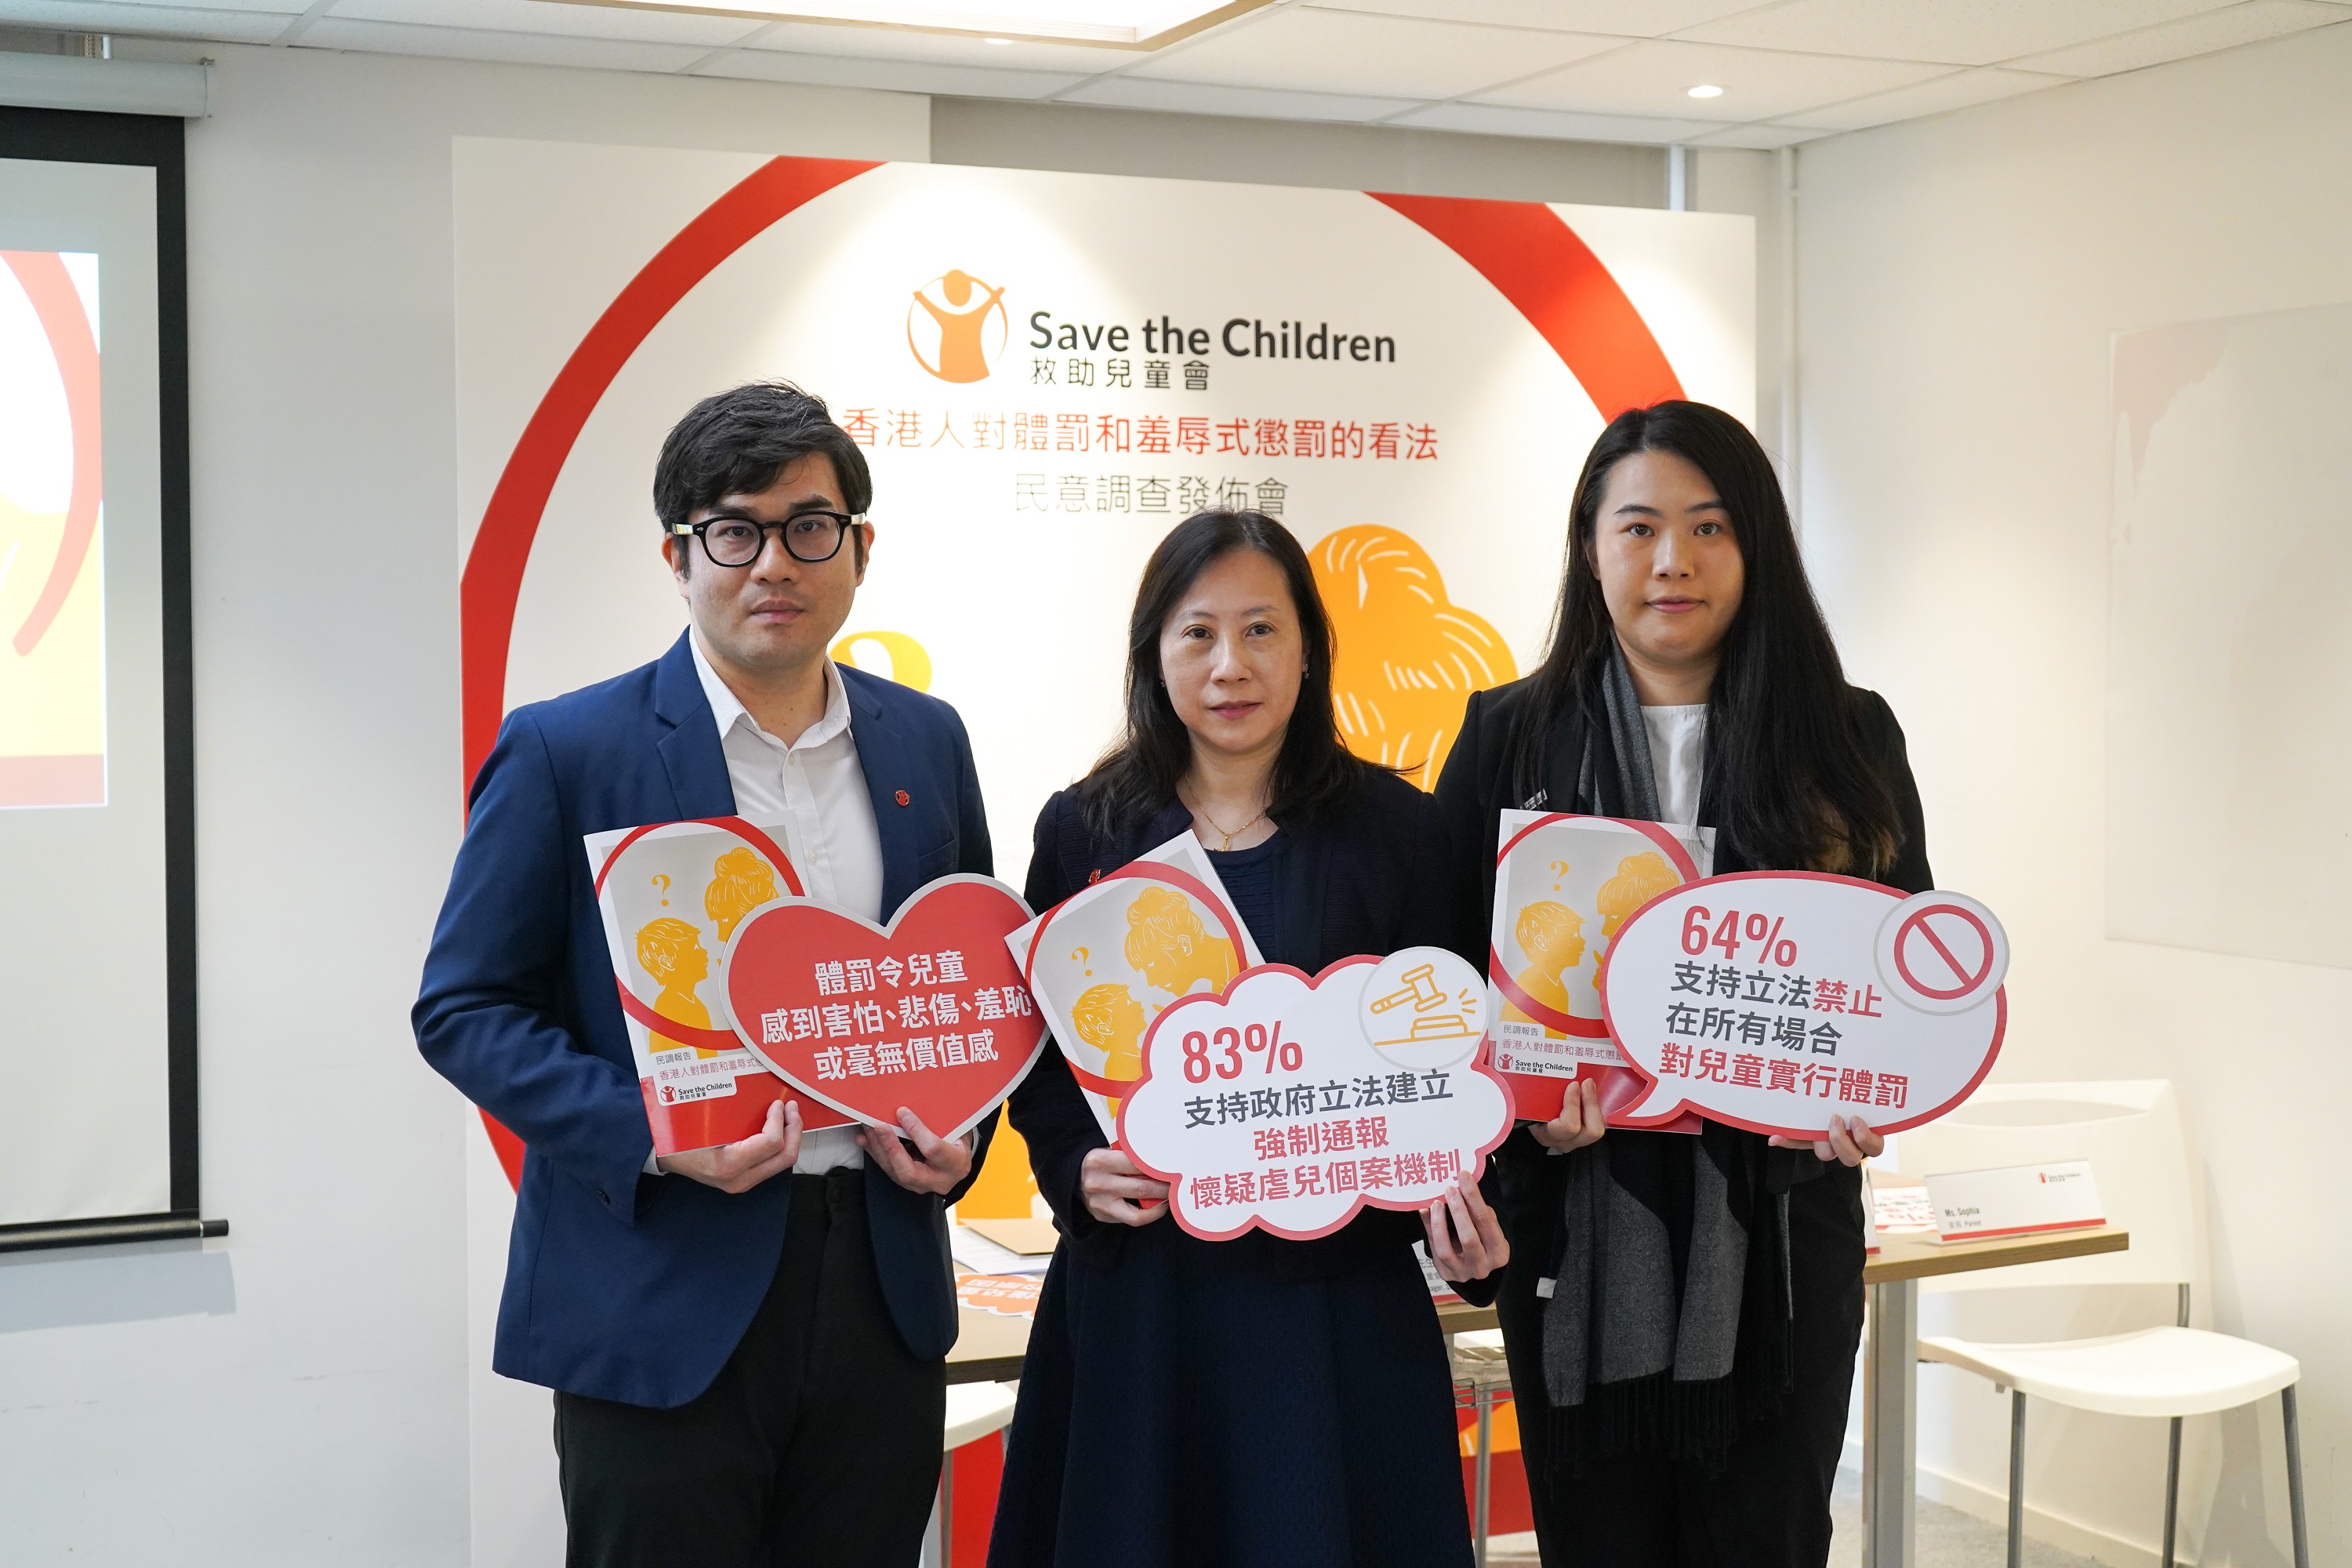 Ms. Winnie Ng, Spokesperson of Save the Children Hong Kong (Middle) and Mr. Ian Li, Advocacy Manager of Save the Children Hong Kong (Left) released the 